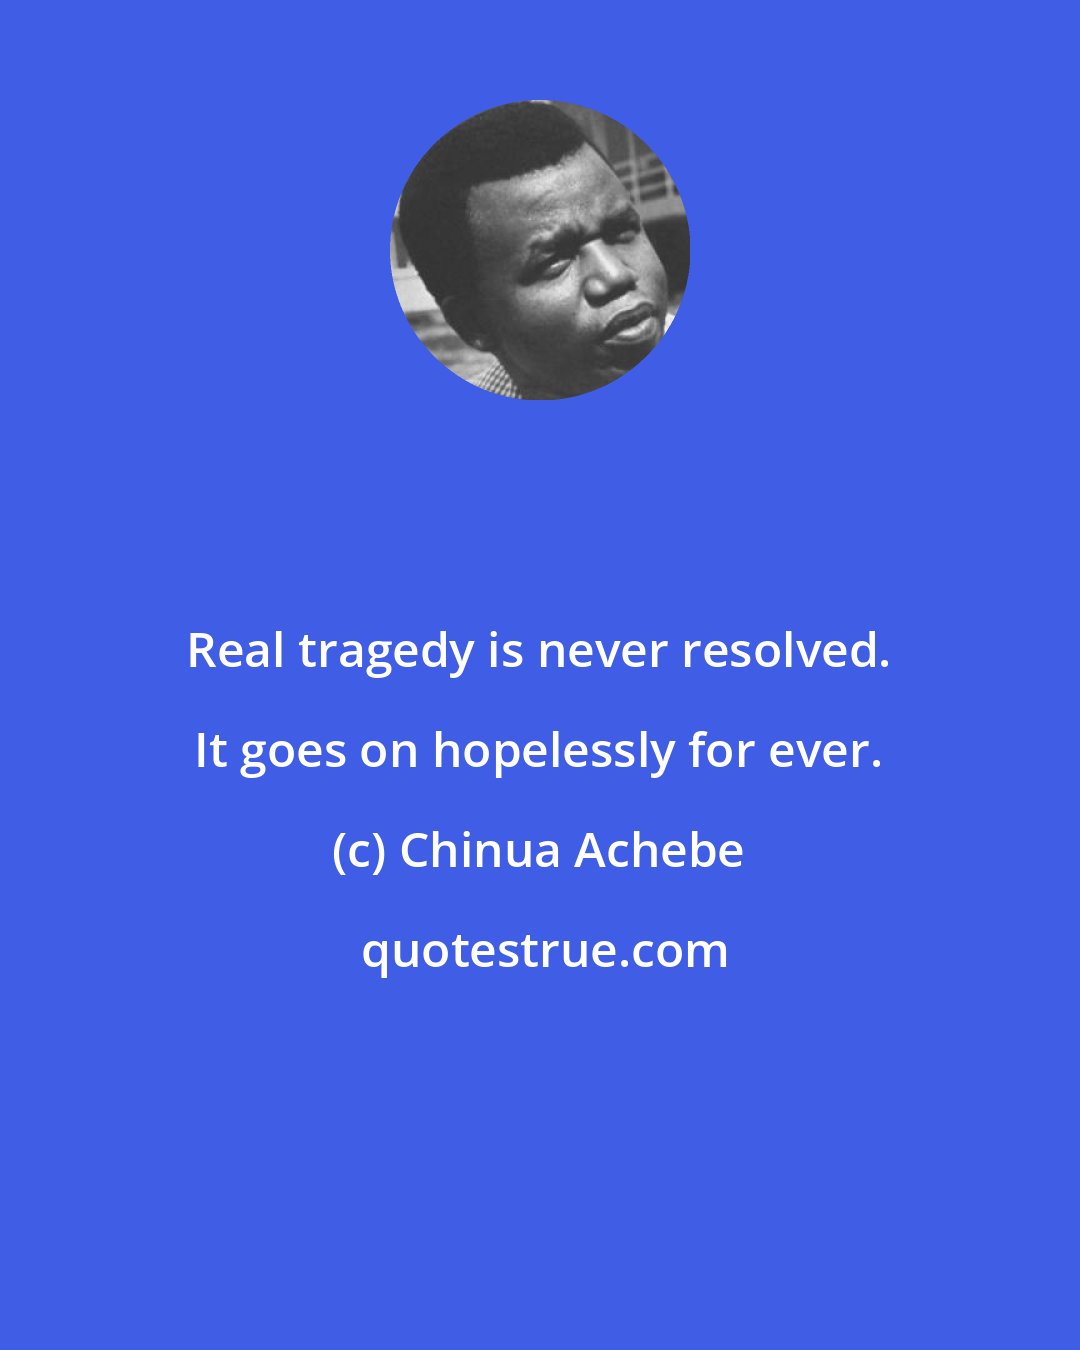 Chinua Achebe: Real tragedy is never resolved. It goes on hopelessly for ever.